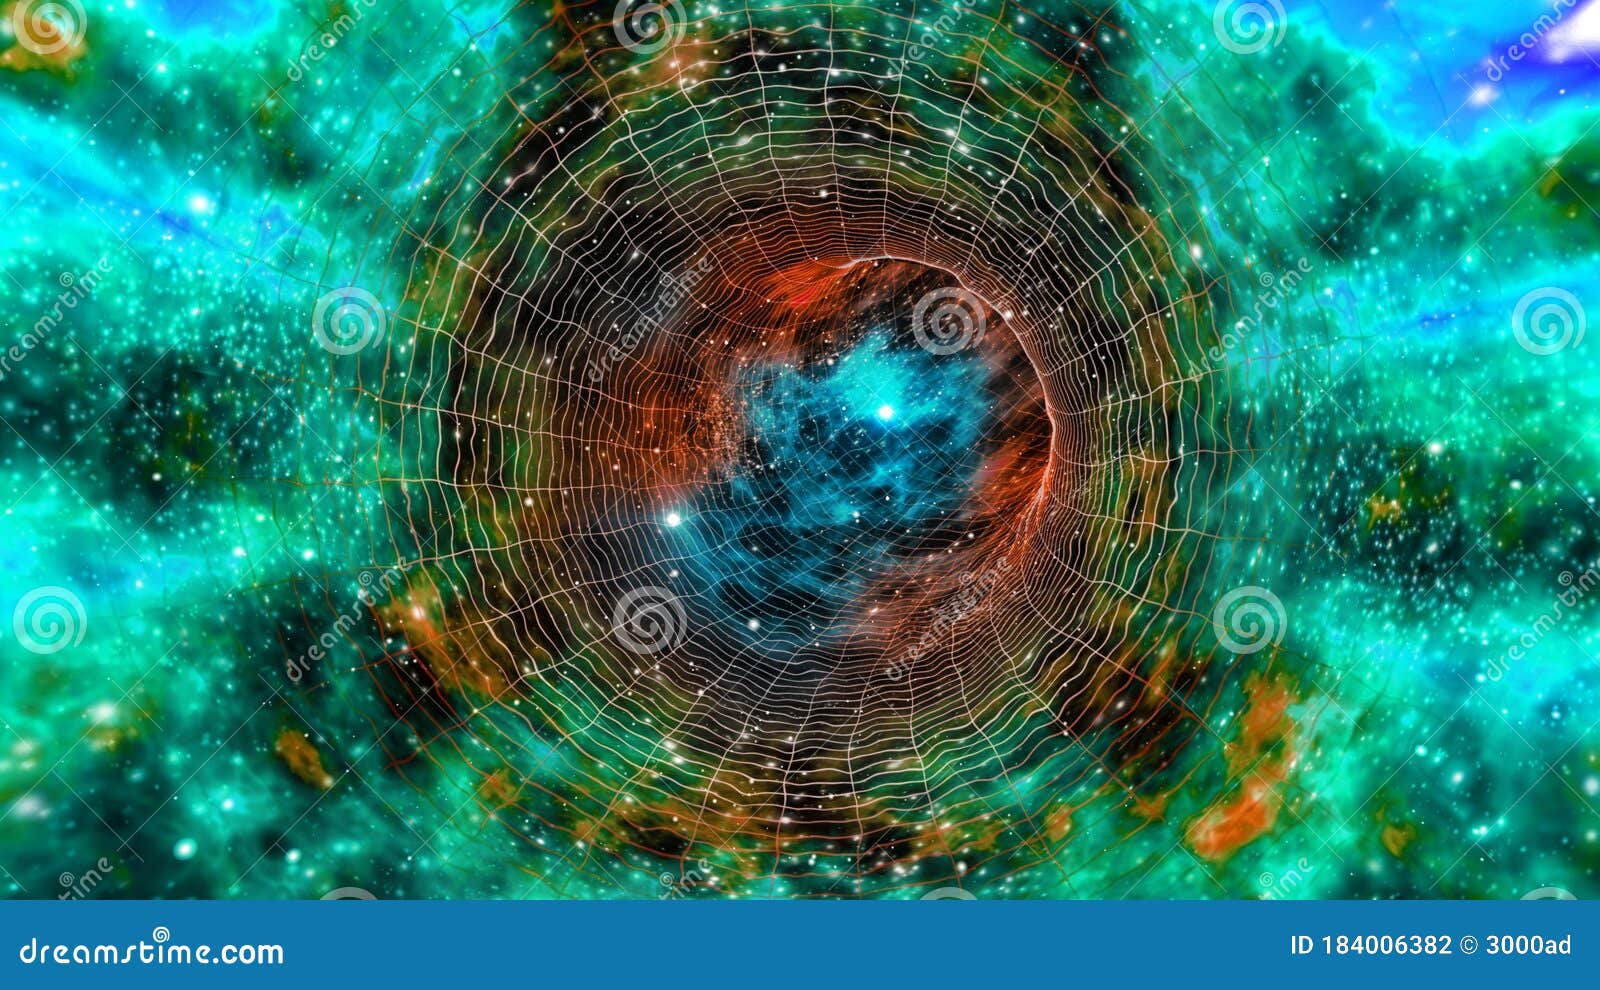 Space Wallpaper with a Wormhole Stock Illustration - Illustration of green,  fantasy: 184006382